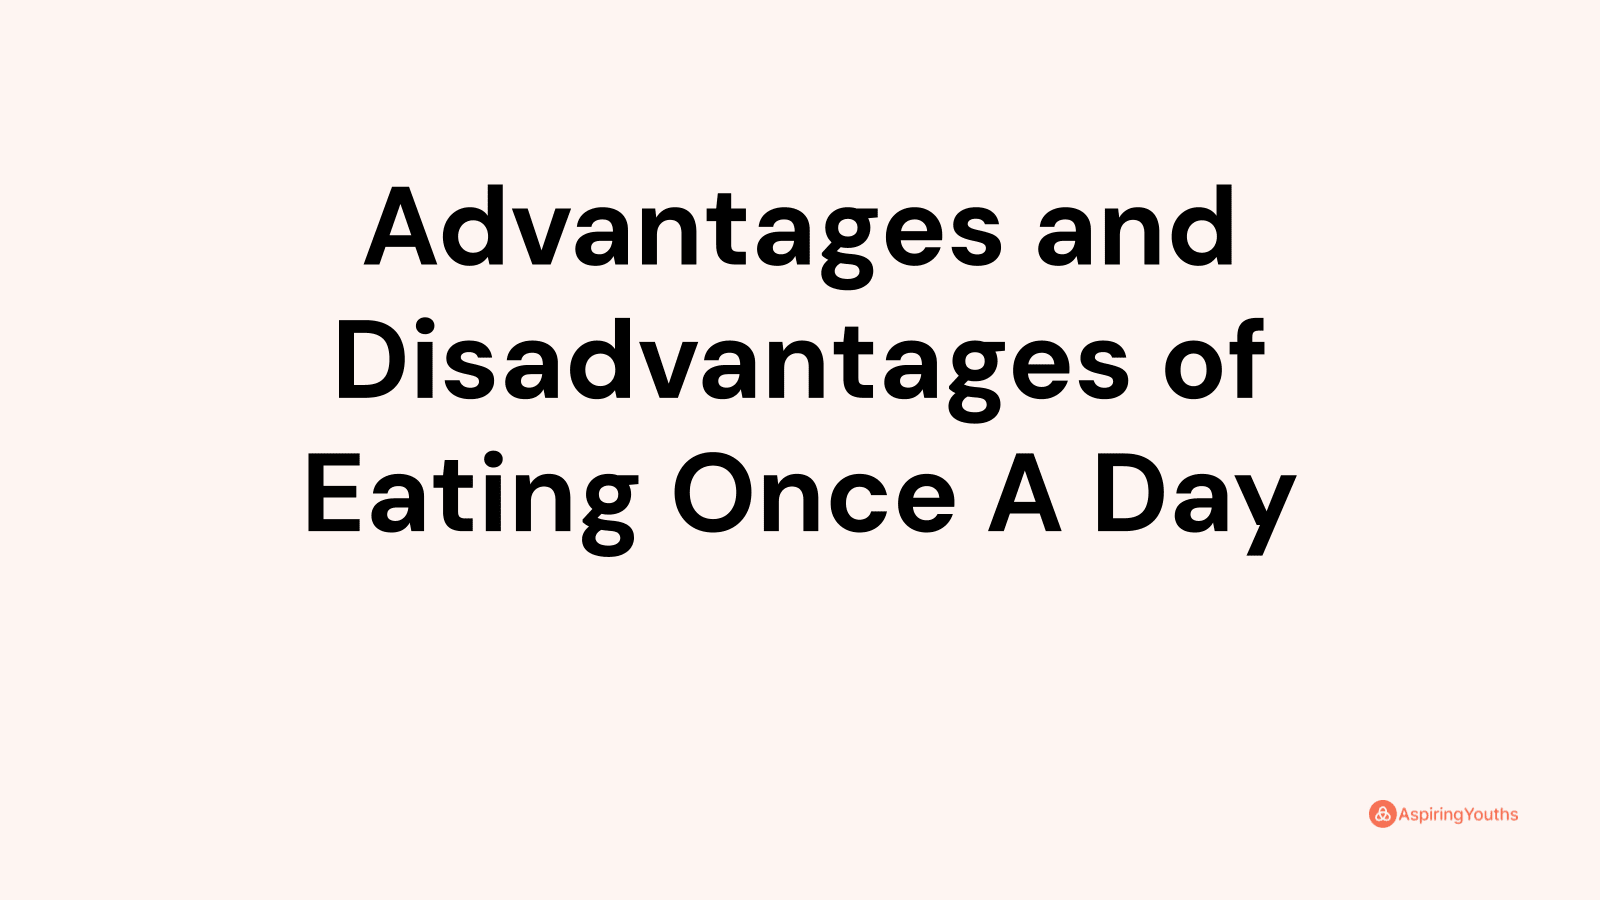 Advantages and disadvantages of Eating Once A Day